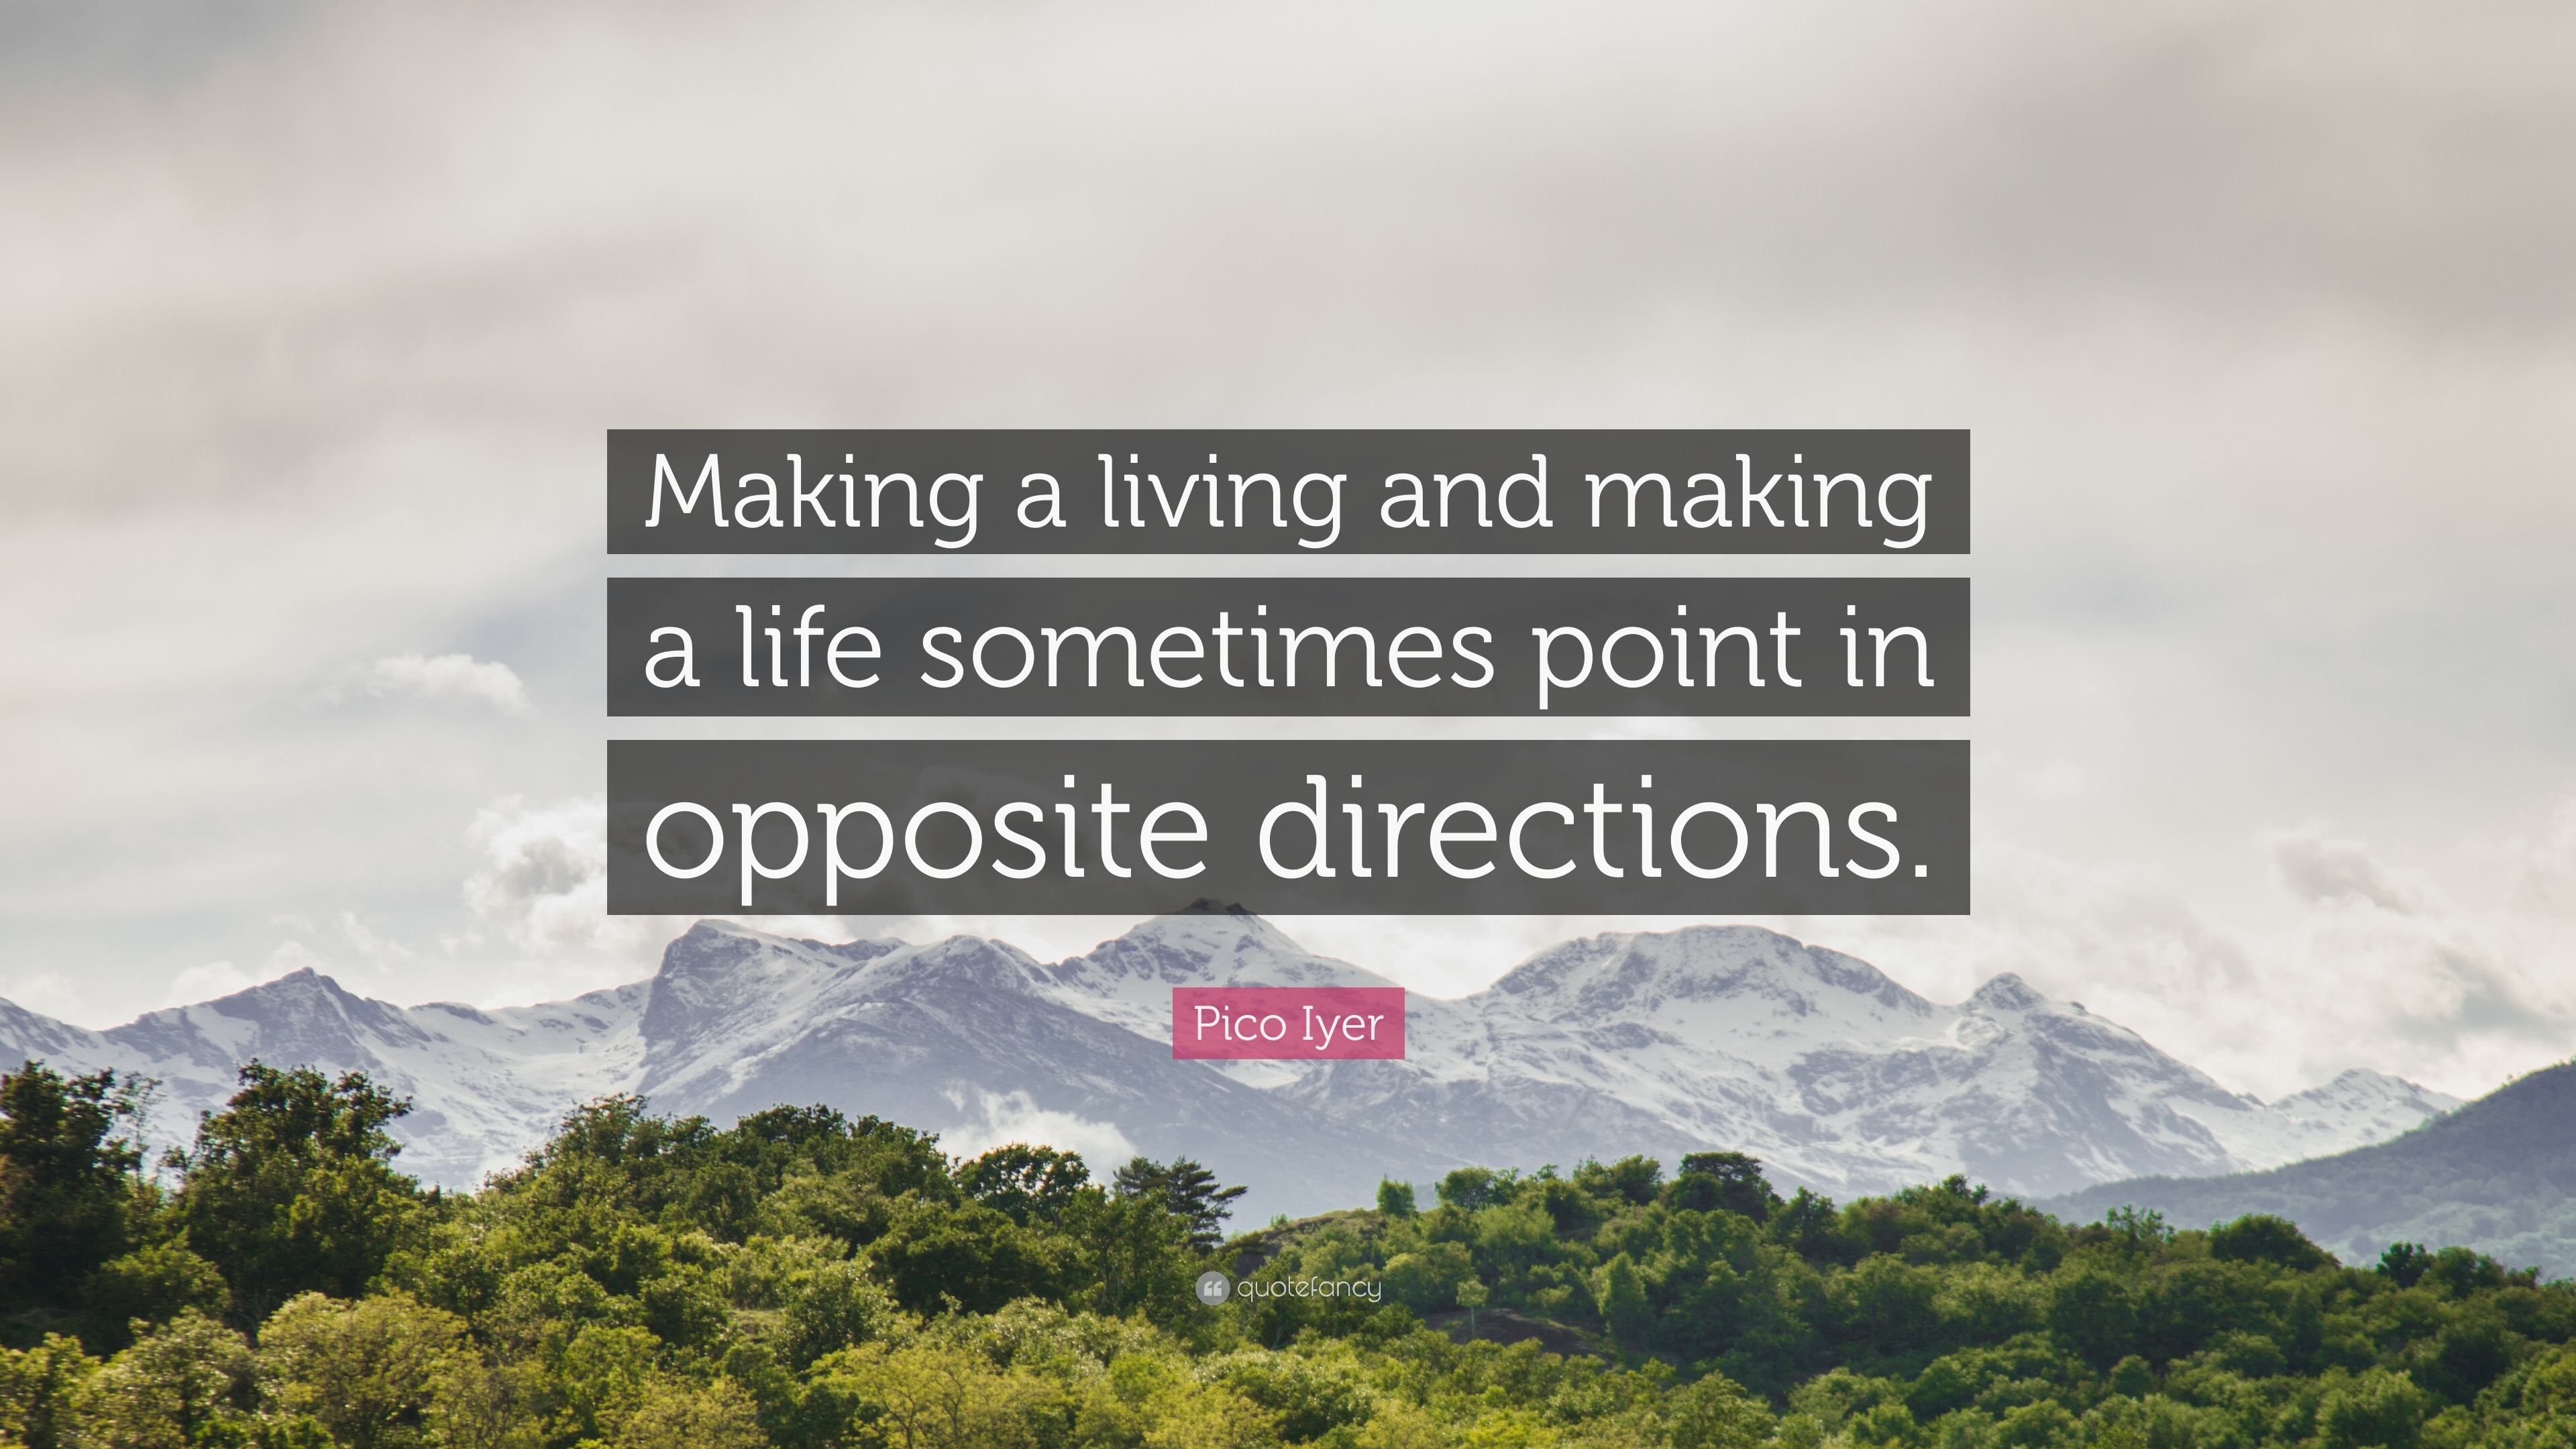 Pico Iyer Quote “Making a living and making a life sometimes point in opposite